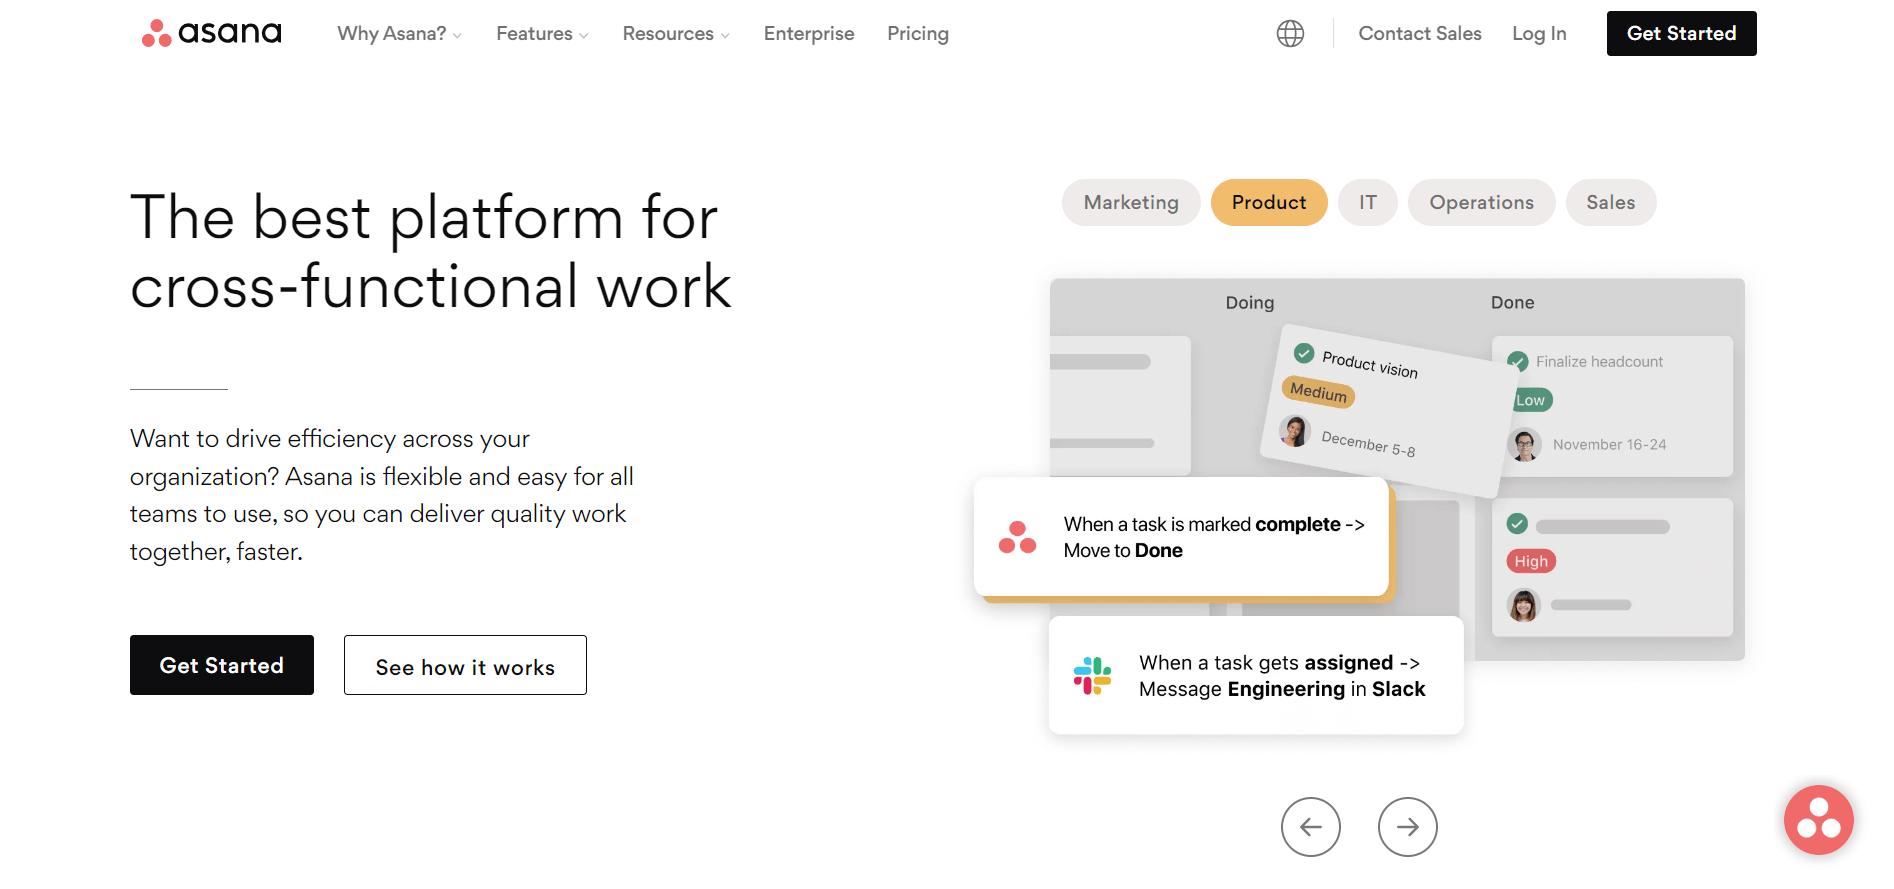 Asana homepage positioning itself as the best platform for cross-functional work, also showing a sketch of a Kanban board. with tasks